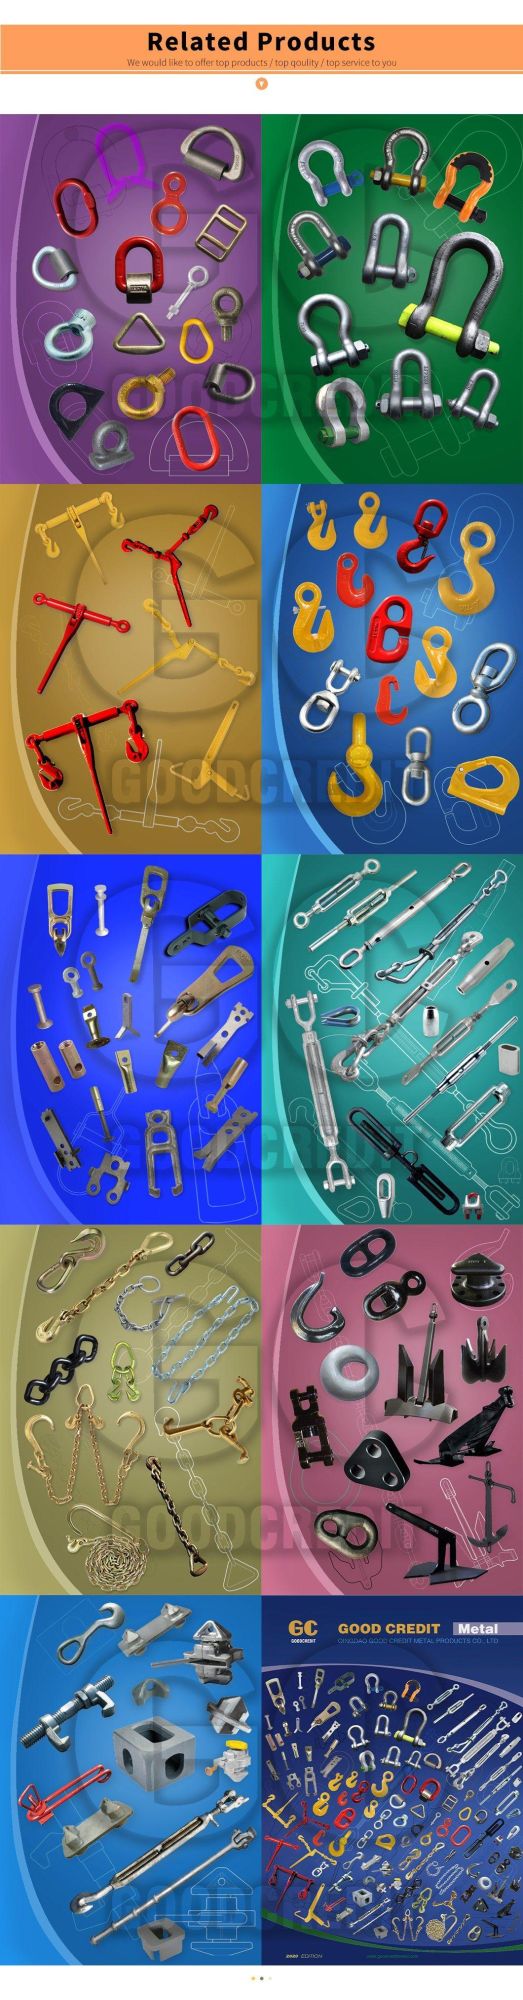 Rigging Hardware/Drop Forged Ratchet Type Load Binder with Hooks